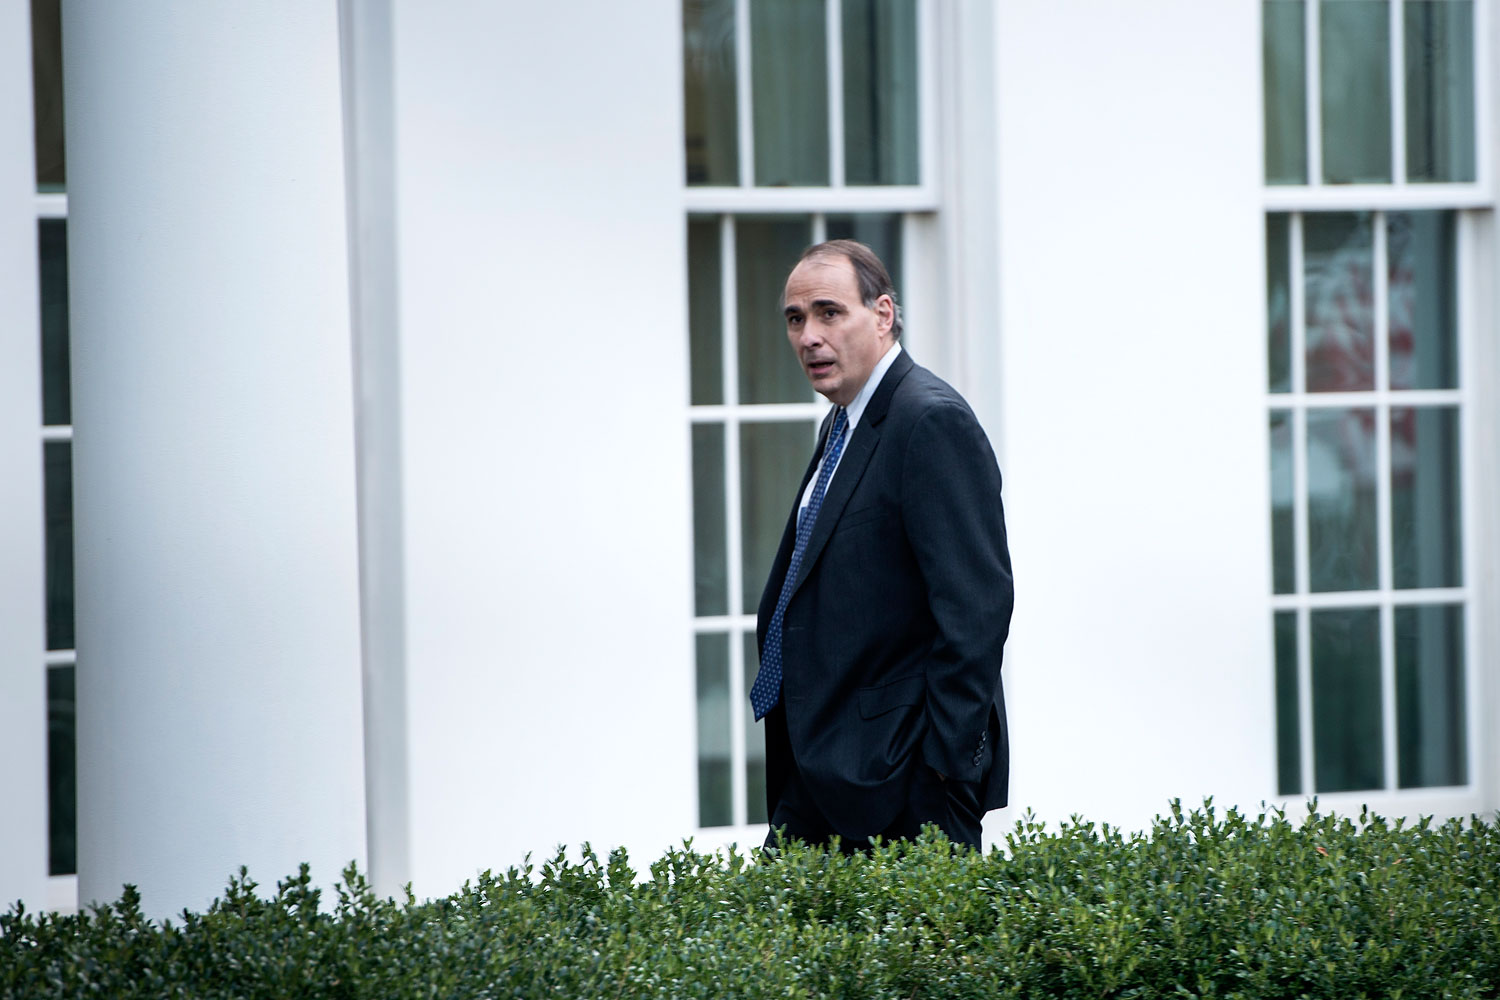 Former White House advisor David Axelrod walks into the West Wing of the White House on Nov. 15, 2013 in Washington.